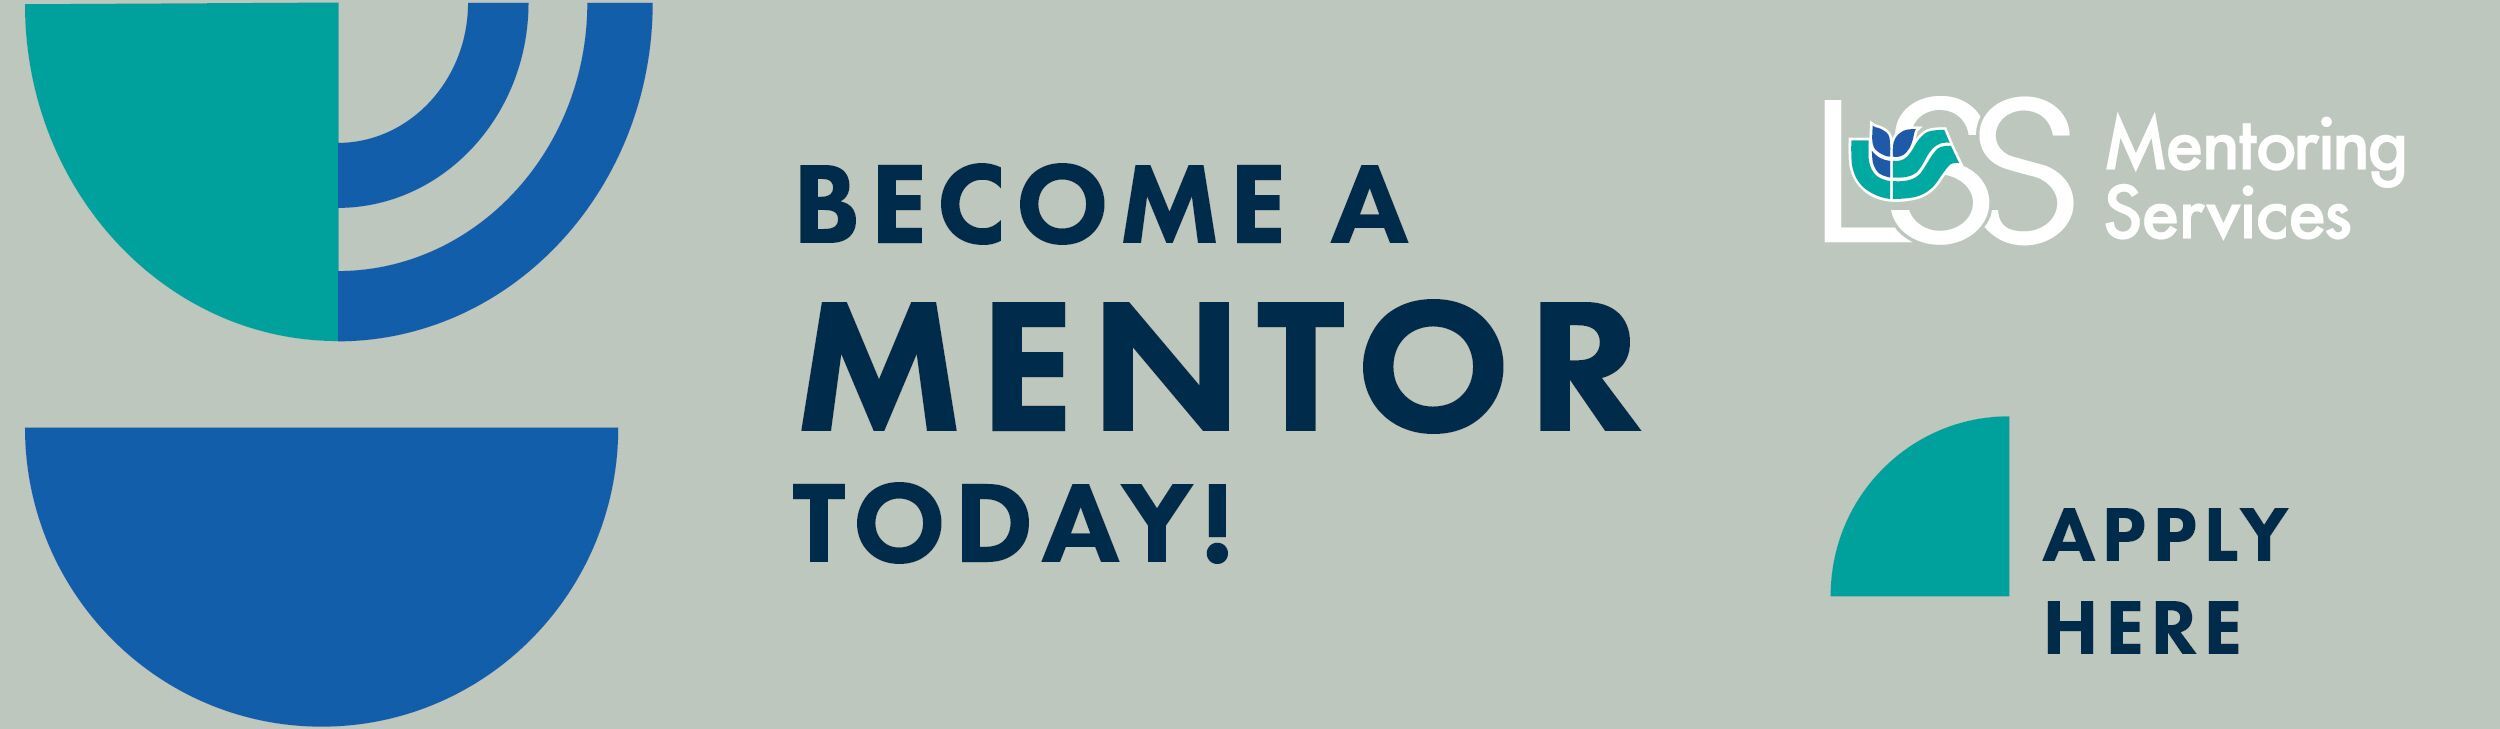 Become A Mentor today banner!